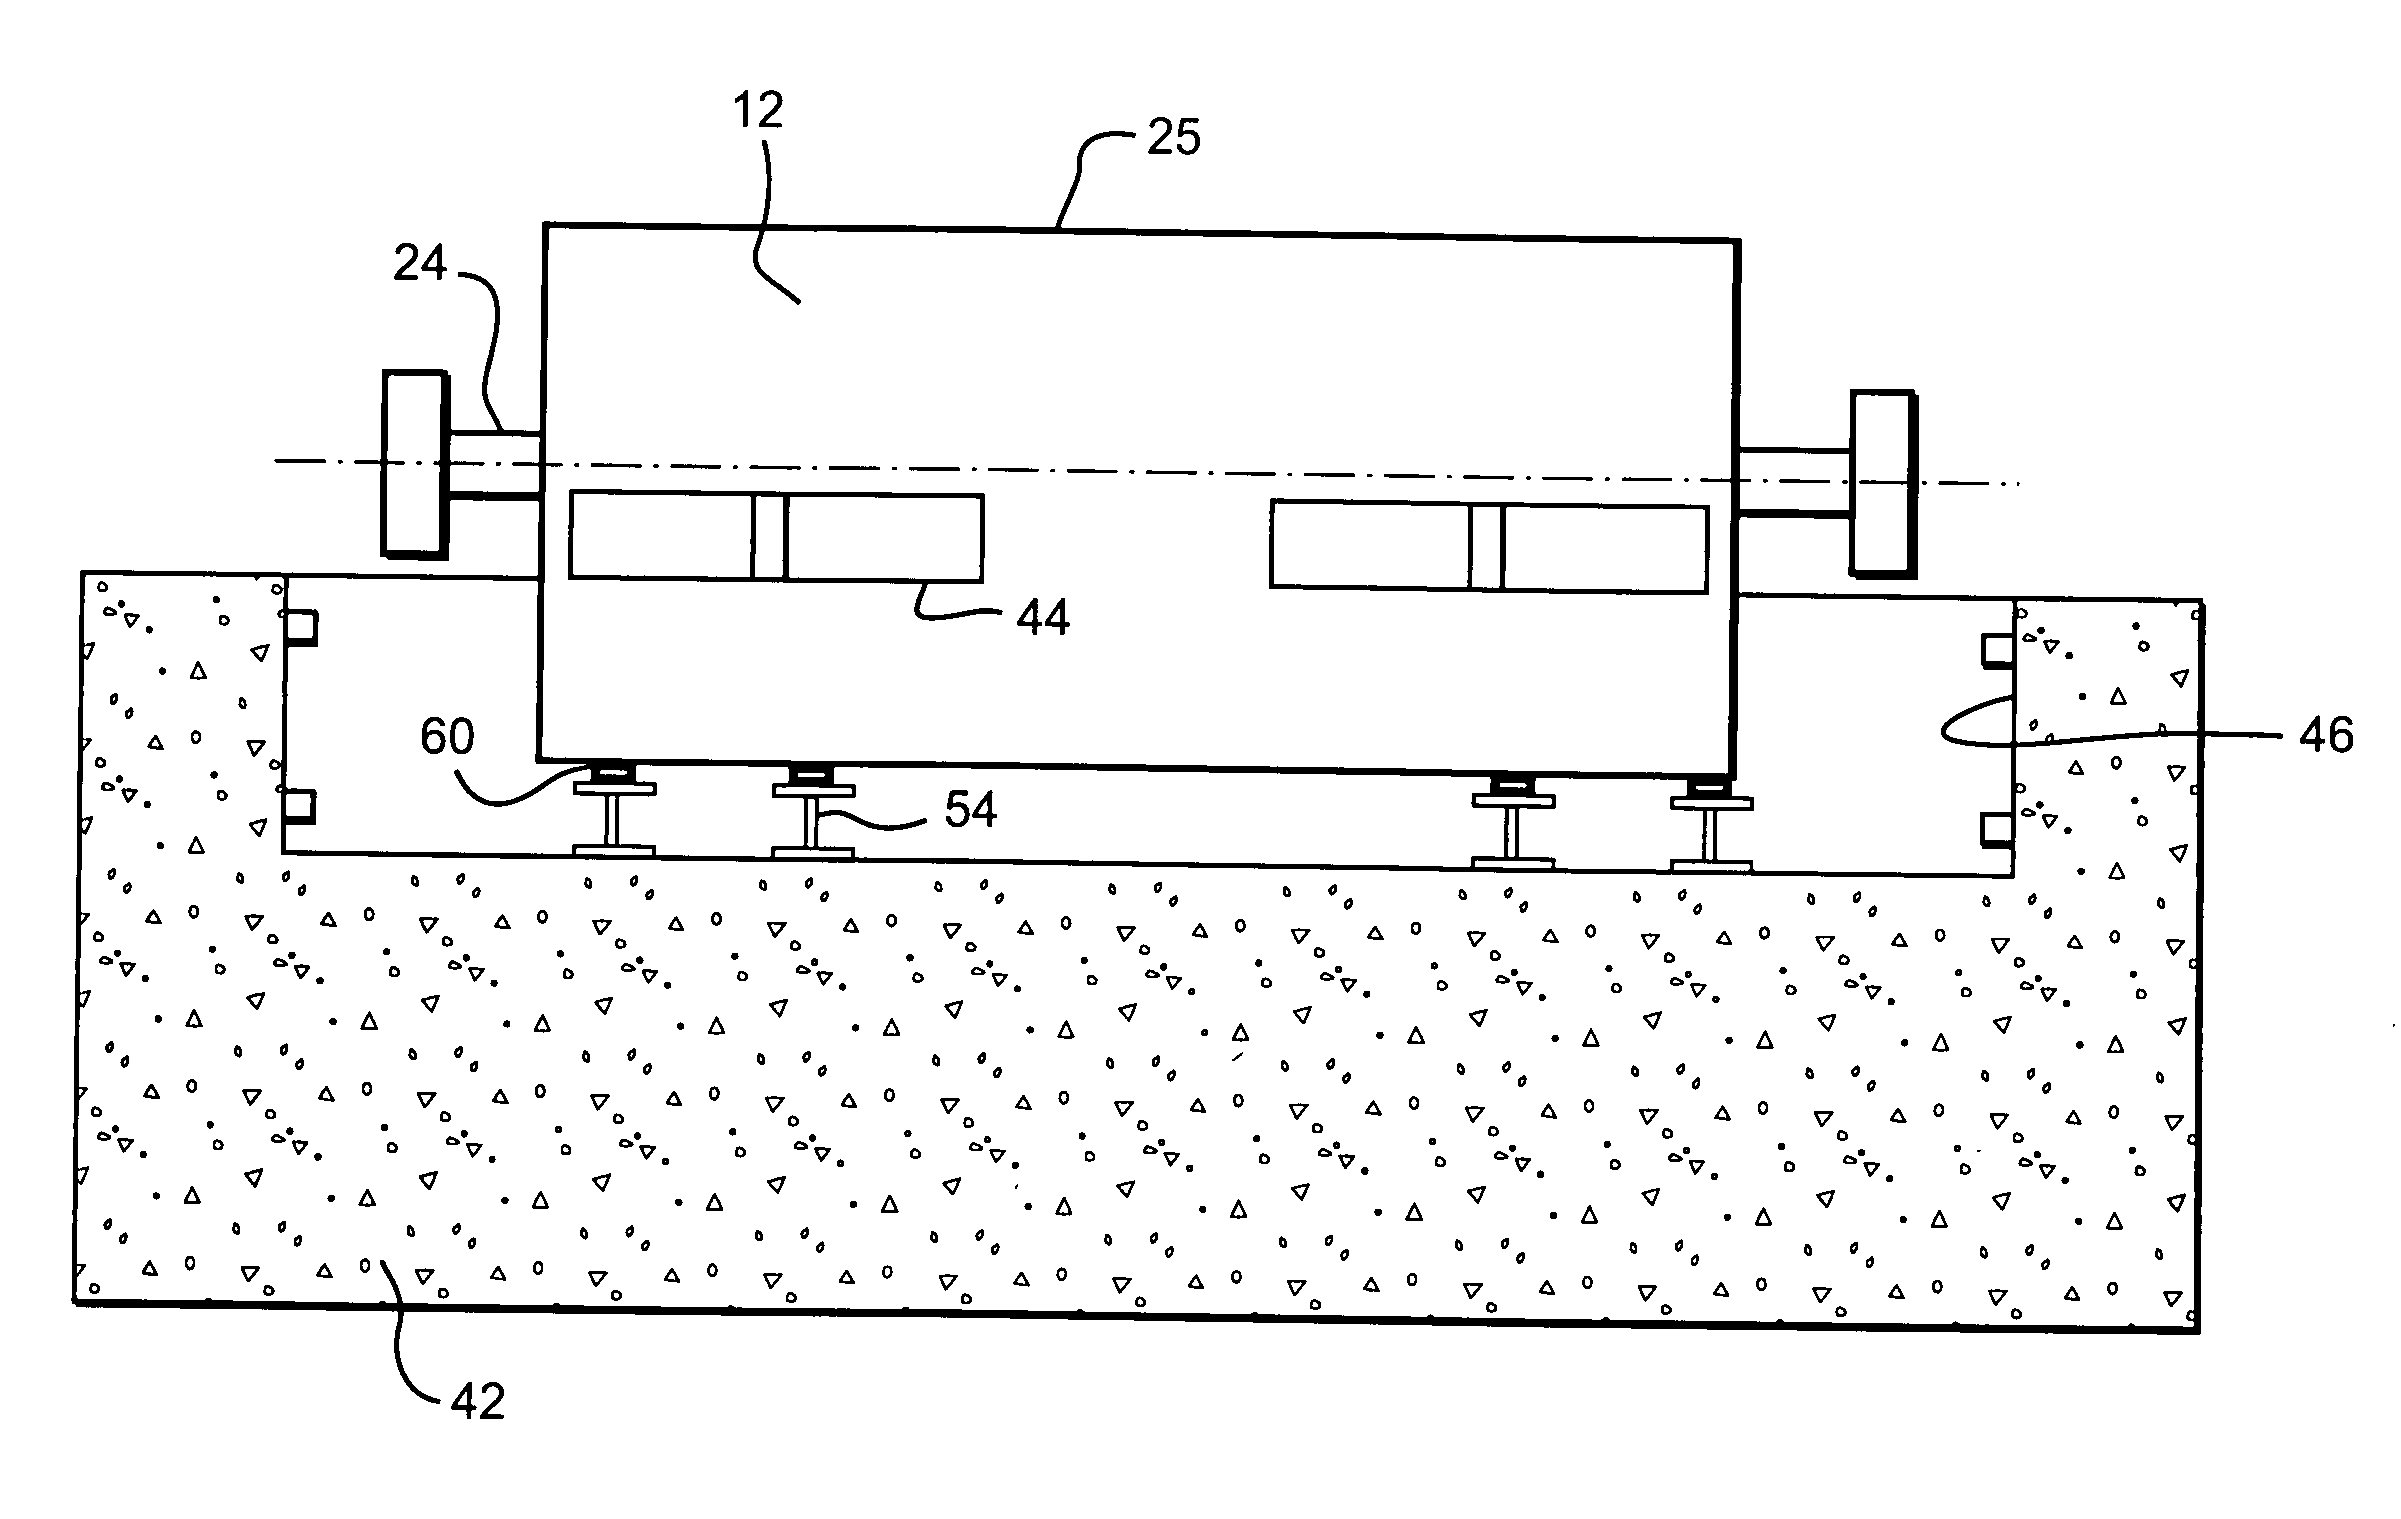 Methods of generator rotor removal in a combined-cycle stag application